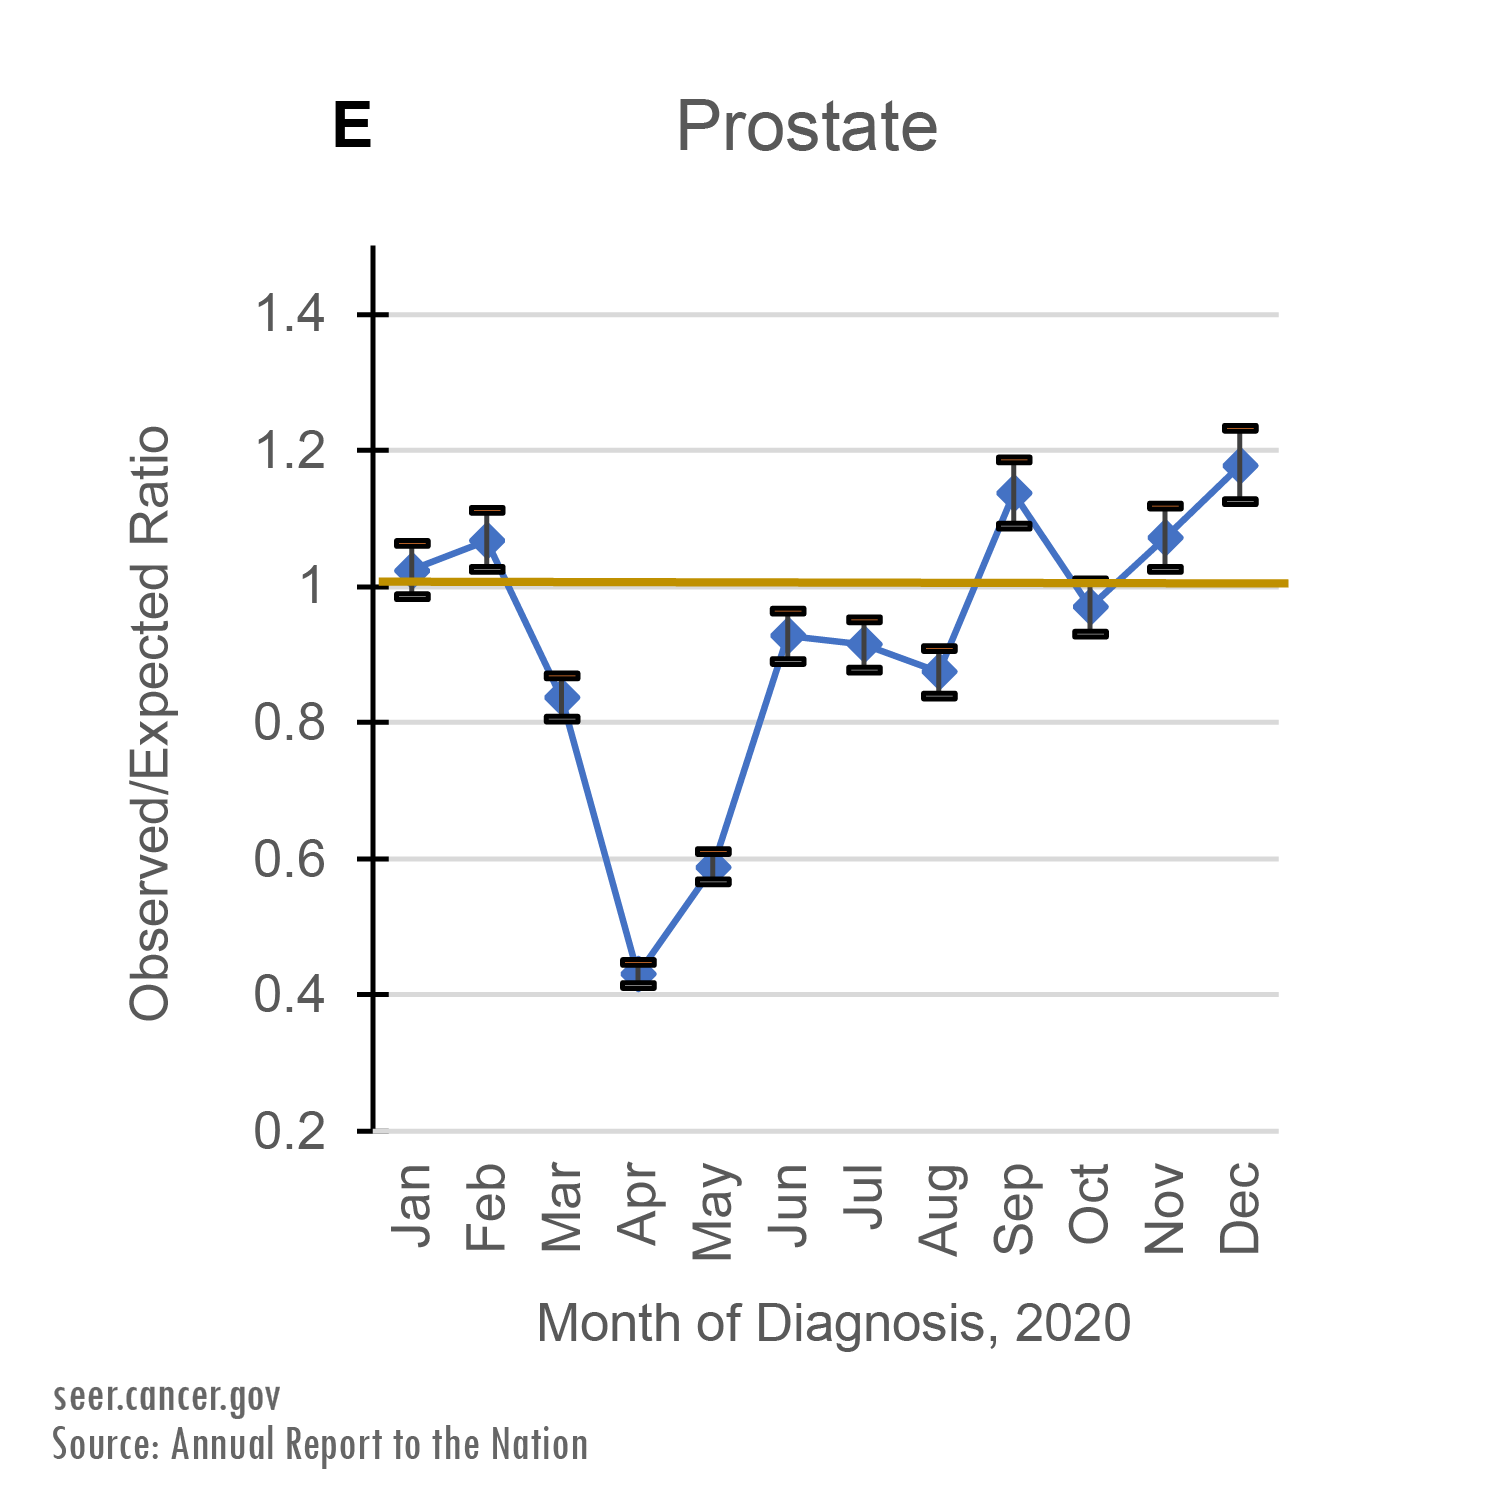 Observed/Expected Ratio of Prostate cancer diagnoses by Month of Diagnosis, 2020